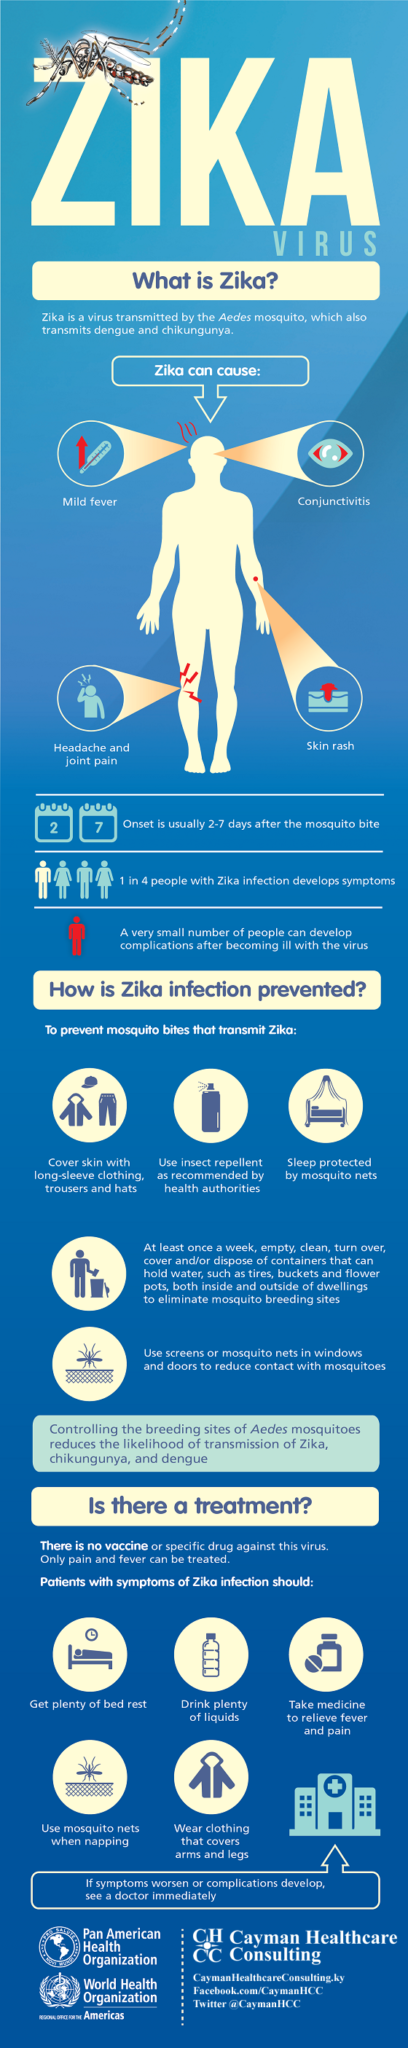 Cayman Healthcare Consulting - Zika Infographic